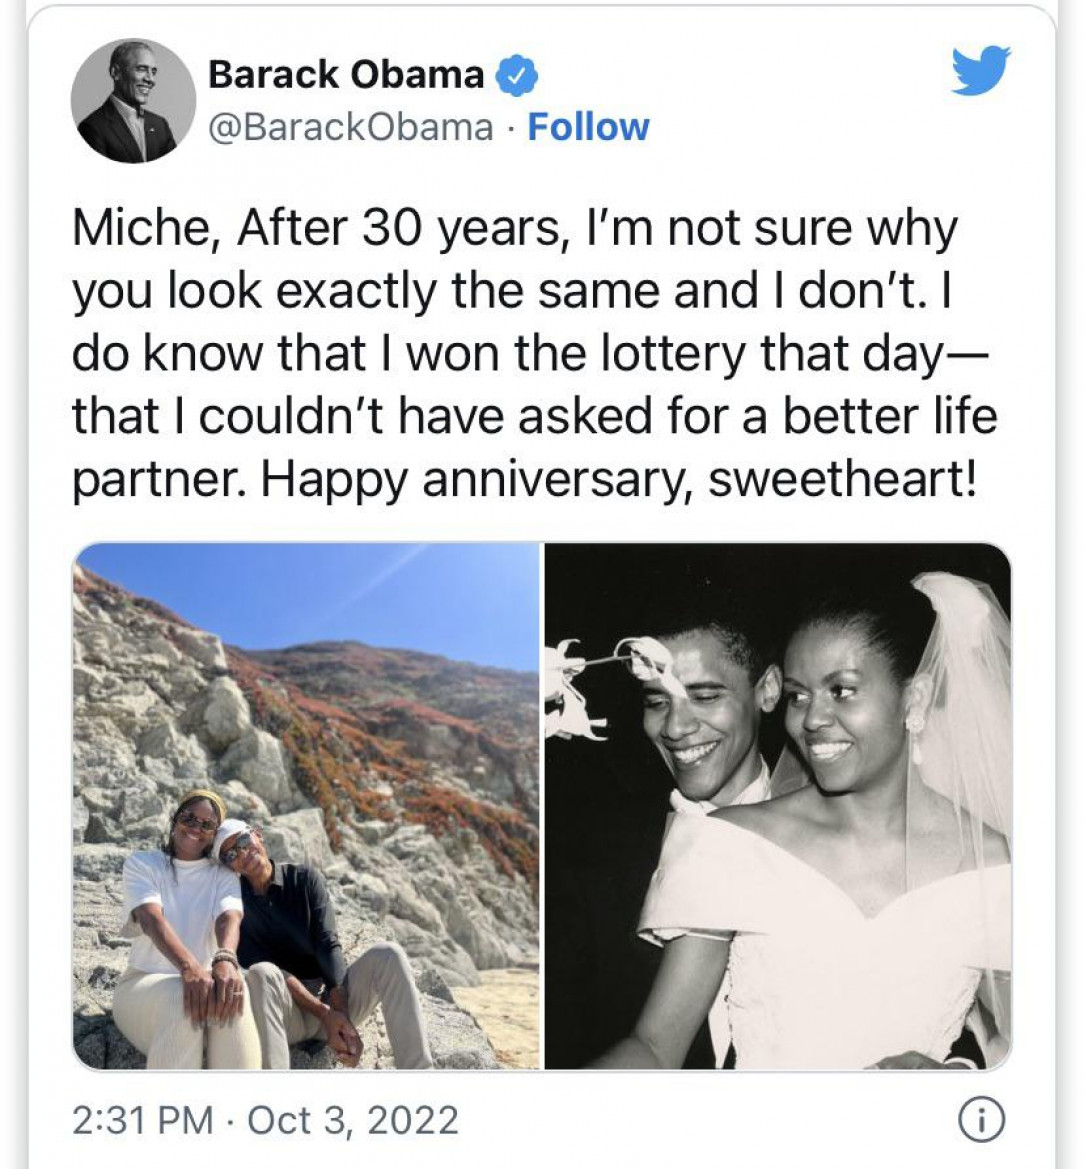 &quot;I won the lottery&quot;: Barack Obama wishes Michelle on their wedding anniversary